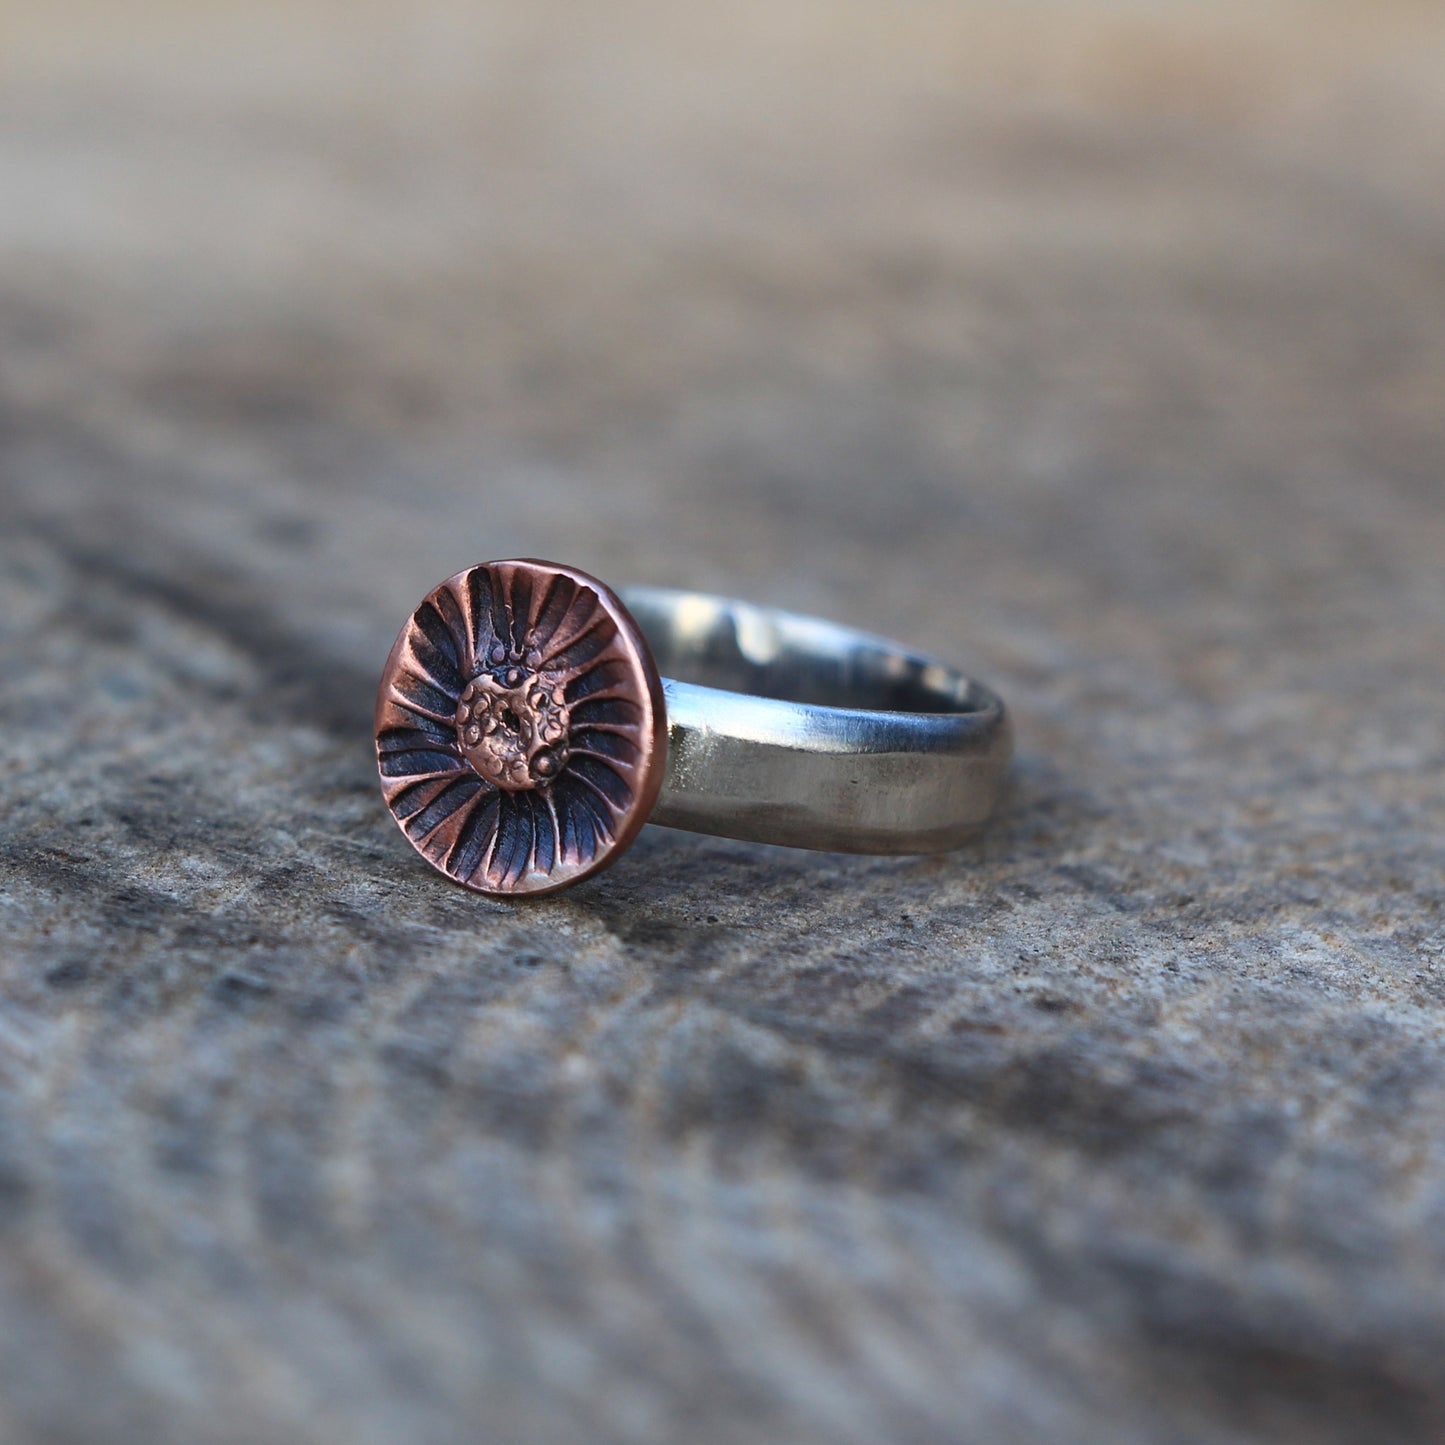 Ring. Contemporary Ring in Copper and Silver Ring. Flower Design . Ladies Silver and Copper flower Ring.